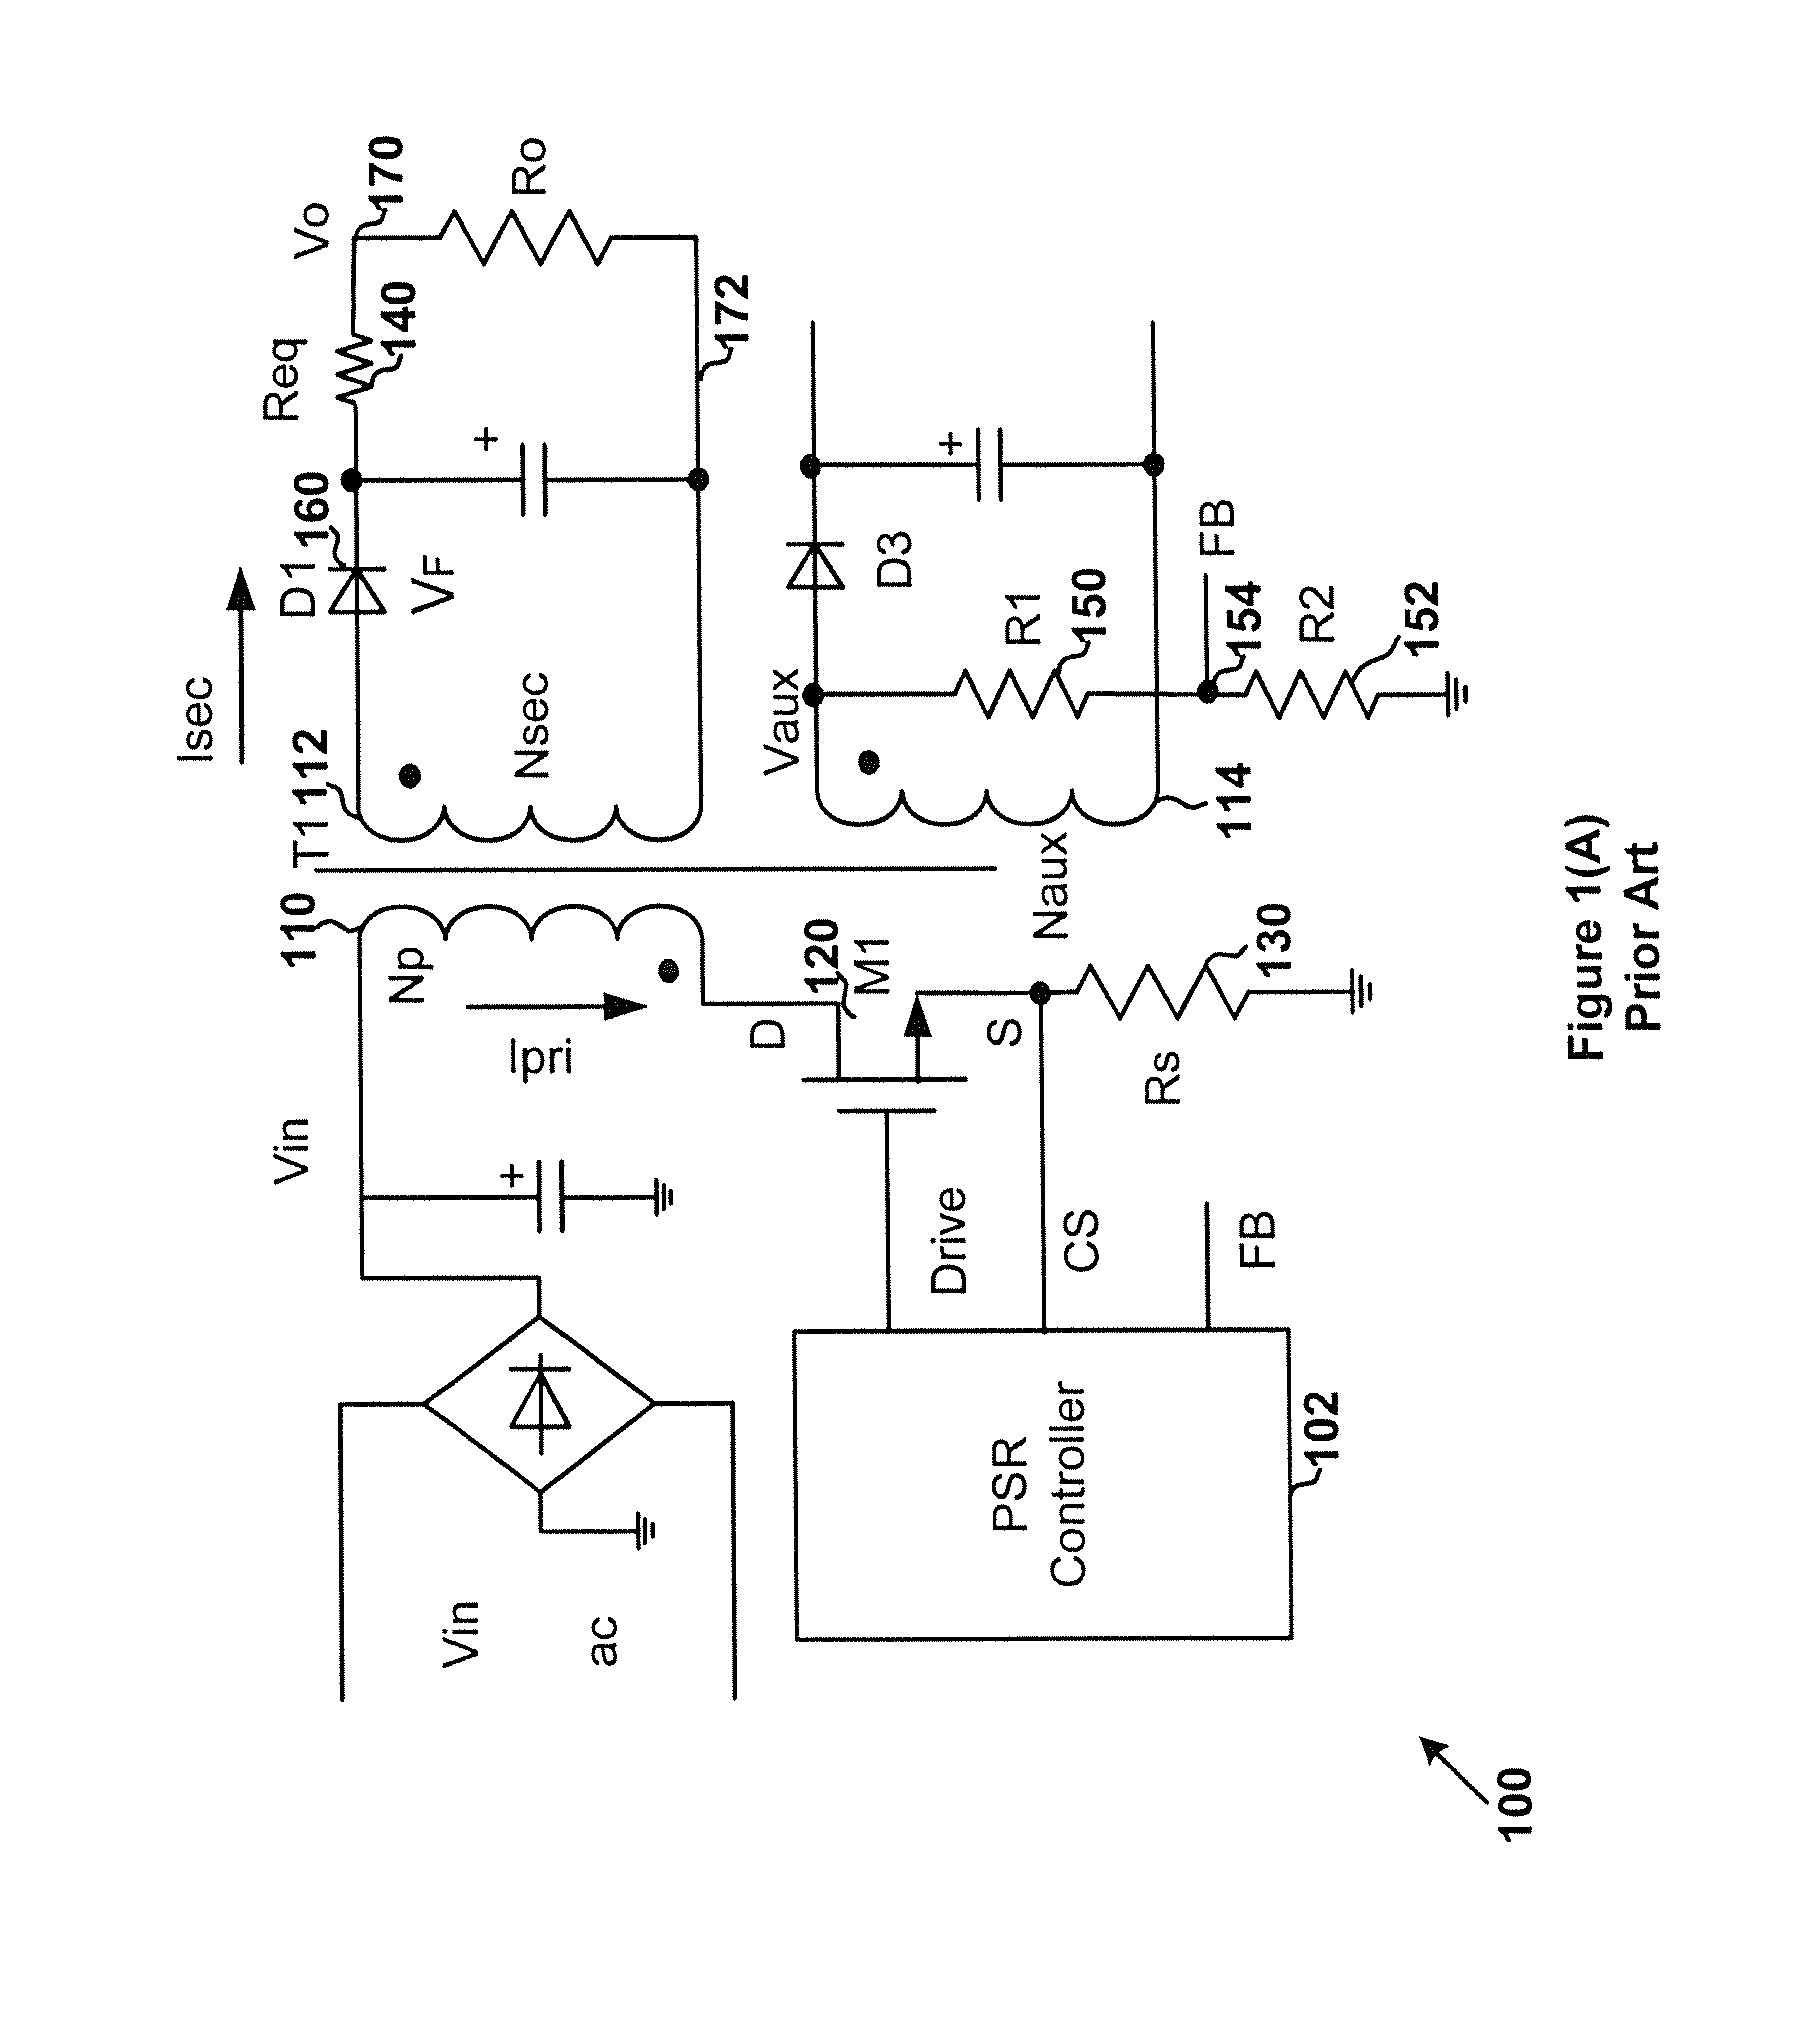 Systems and methods for adjusting frequencies and currents based on load conditions of power conversion systems